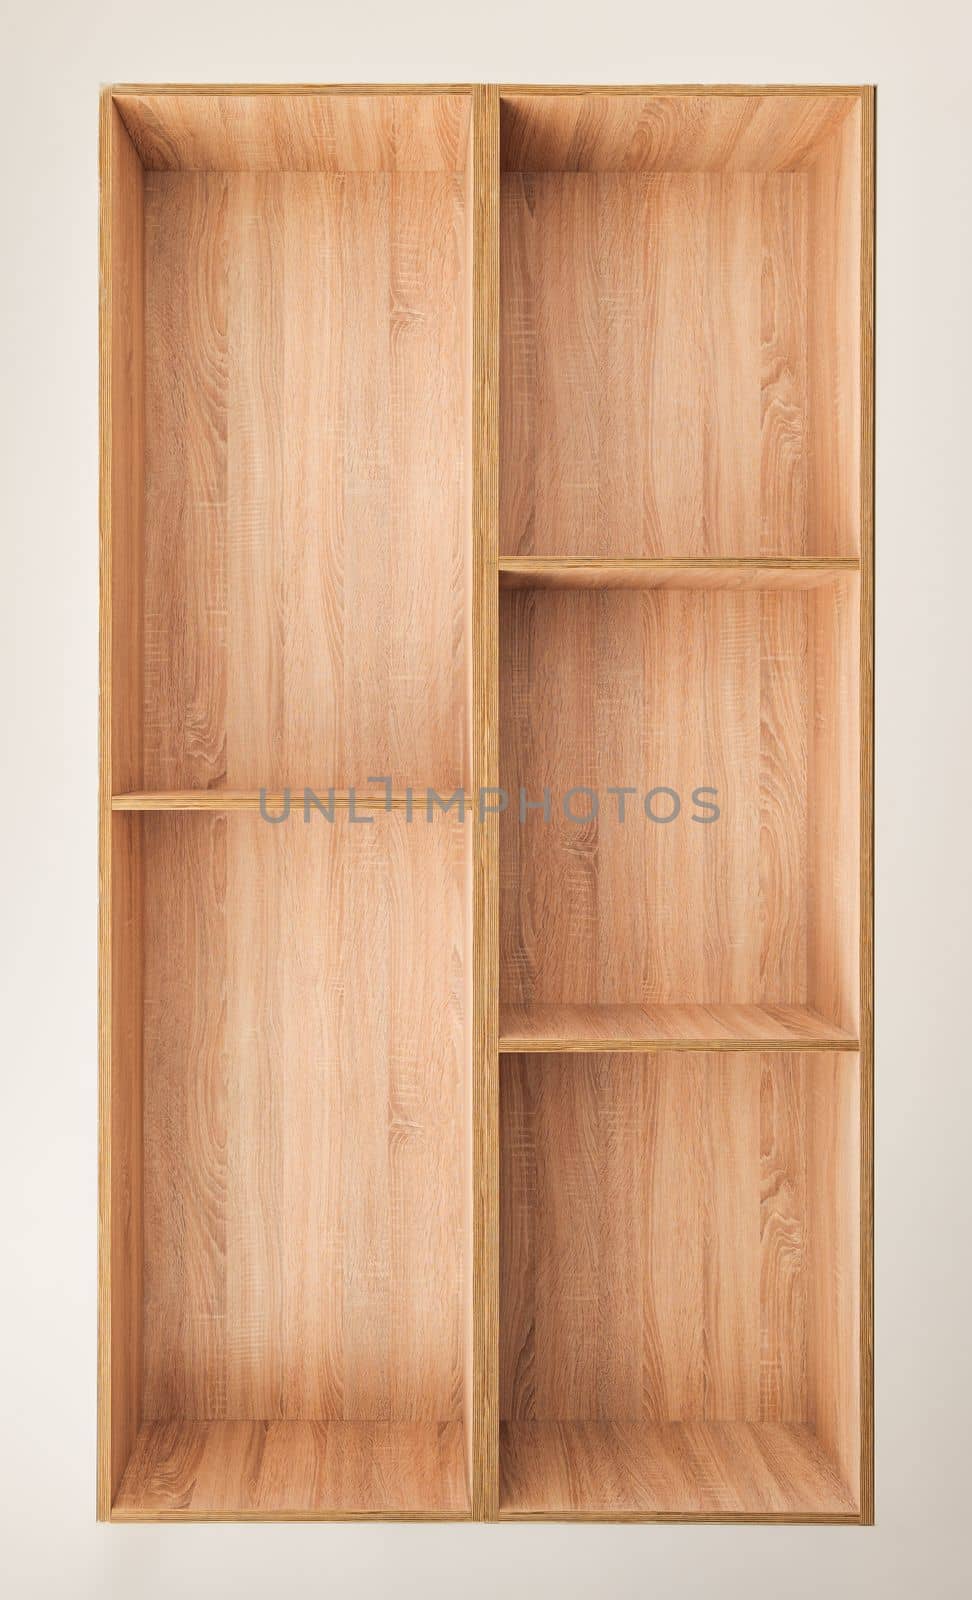 Rack with shelves made of light wood against white background. Sturdy construction with several shelves mounted on supporting vertical boards. Solving problem in absence of storage space for items. by apavlin